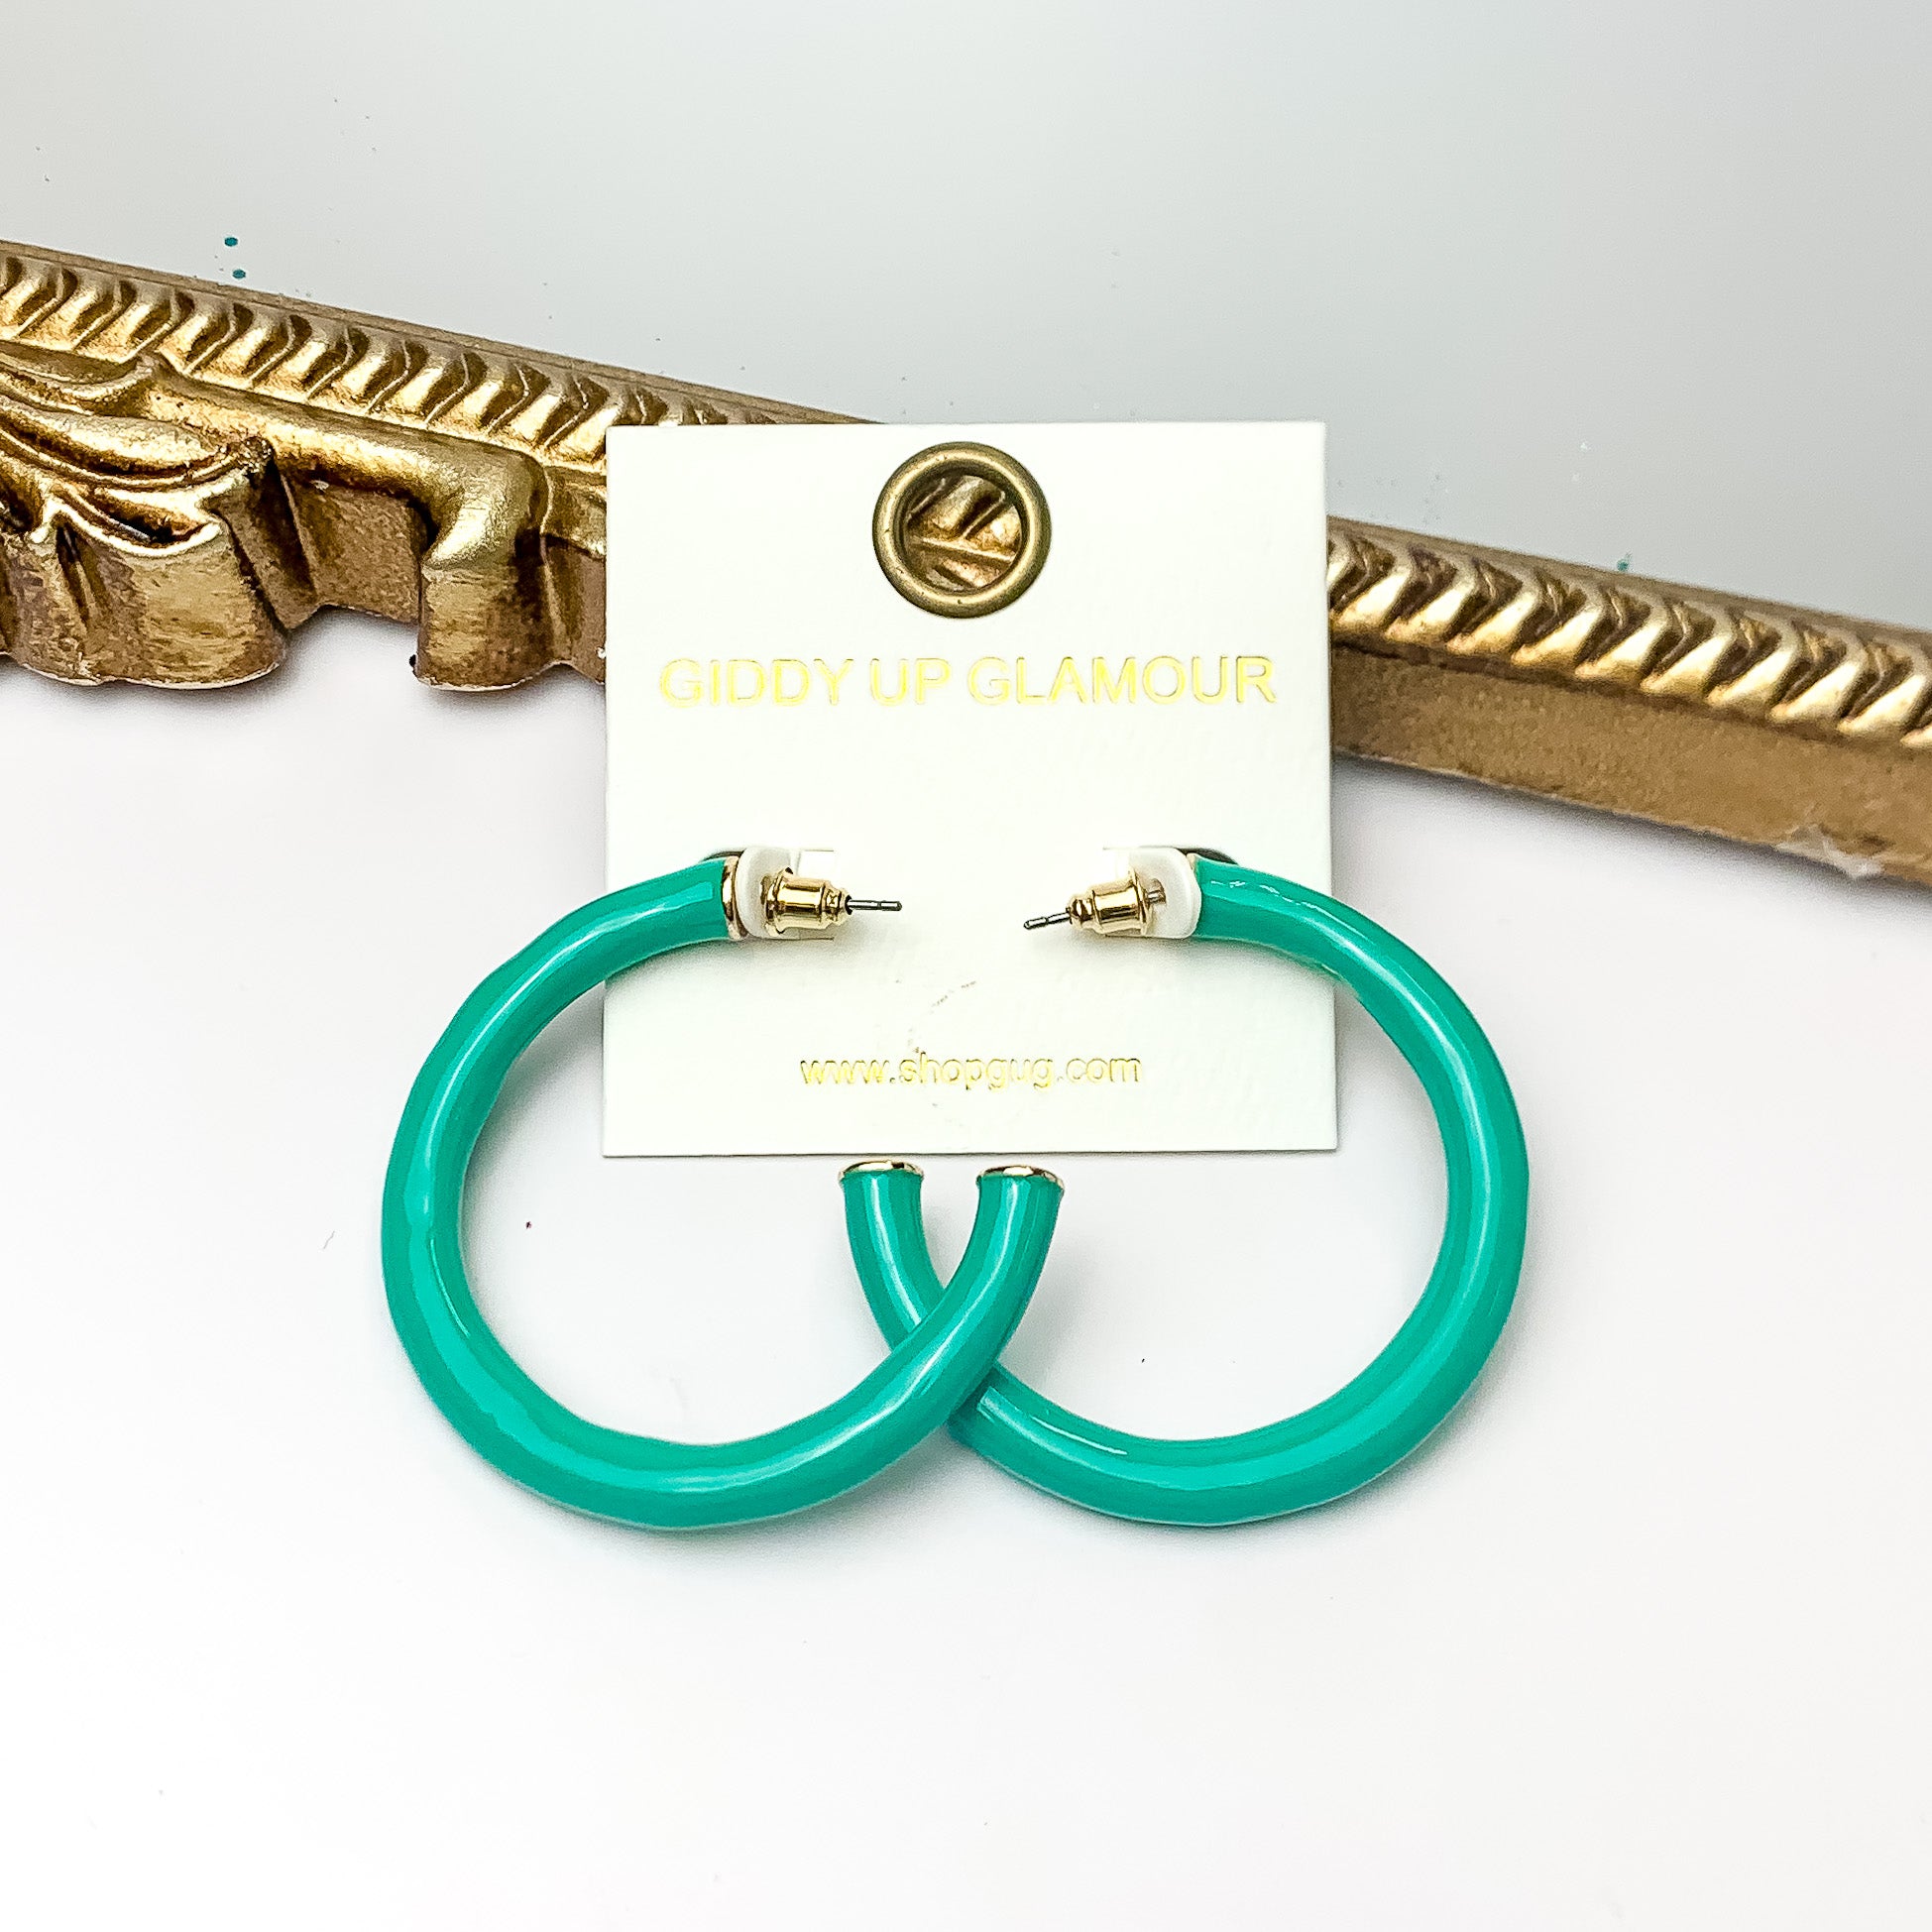 Plan For Cabo Large Hoop Earrings in Turquoise Green. Pictured on a white background with a gold frame behind the earrings.